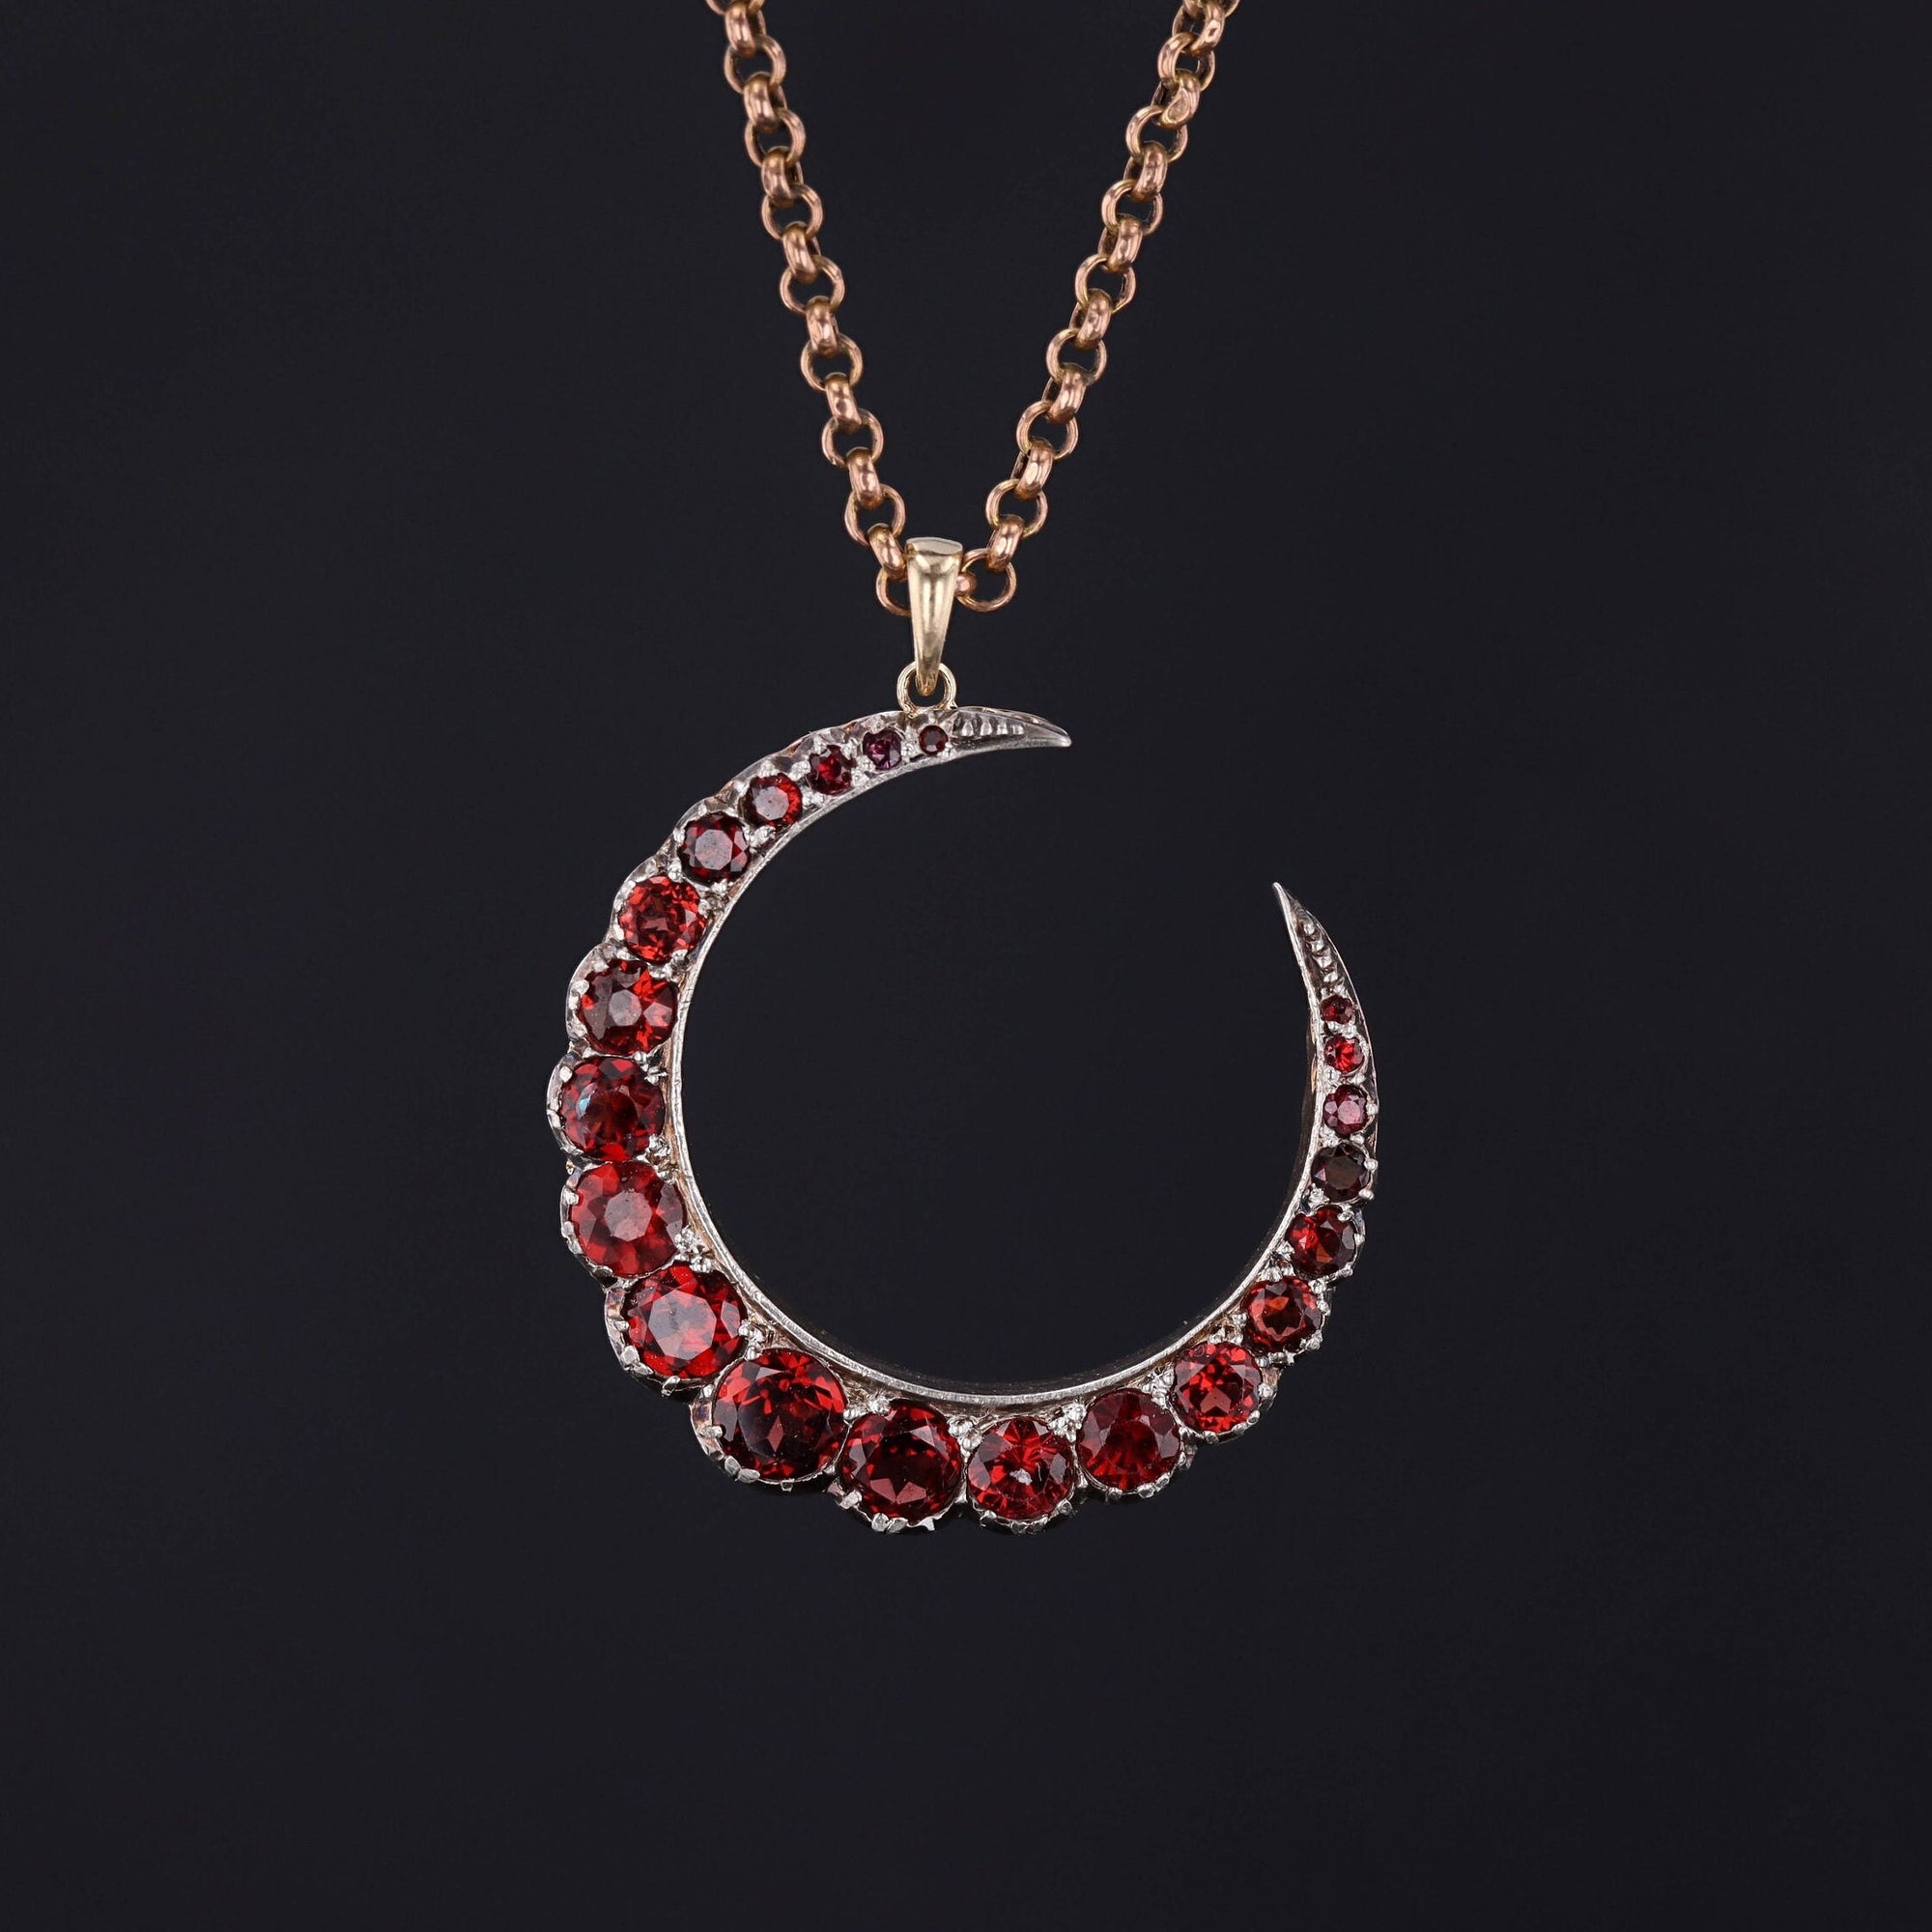 Antique Garnet Crescent Moon | Silver Topped 14k Gold Pendant on Optional 9ct Gold Chain